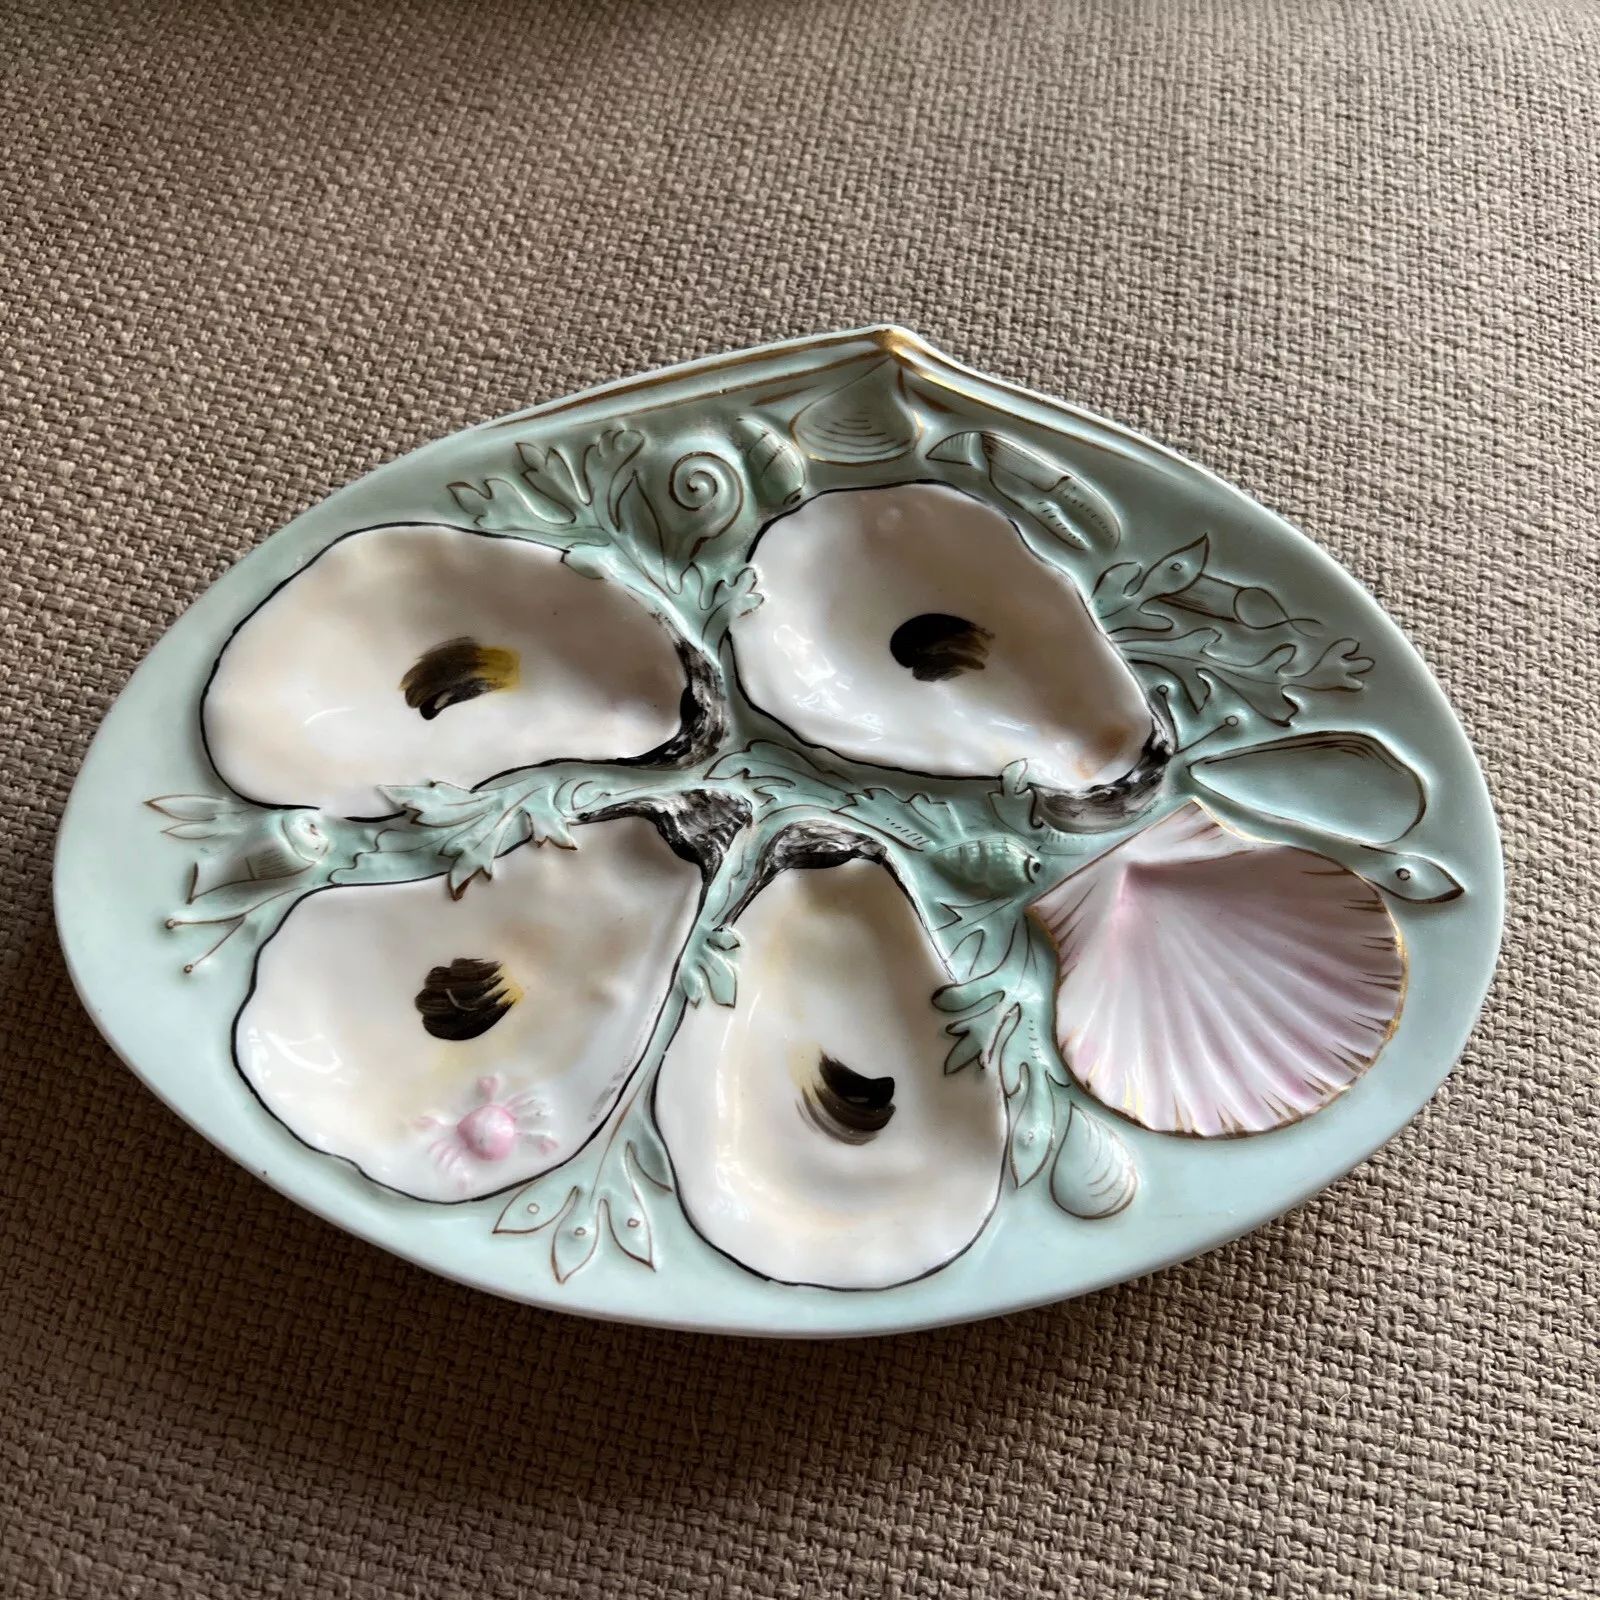 PASTELS- Antique 4 WELL UPW Clam Shell OYSTER PLATE - Pat. Jan. 4, 1881 | eBay US